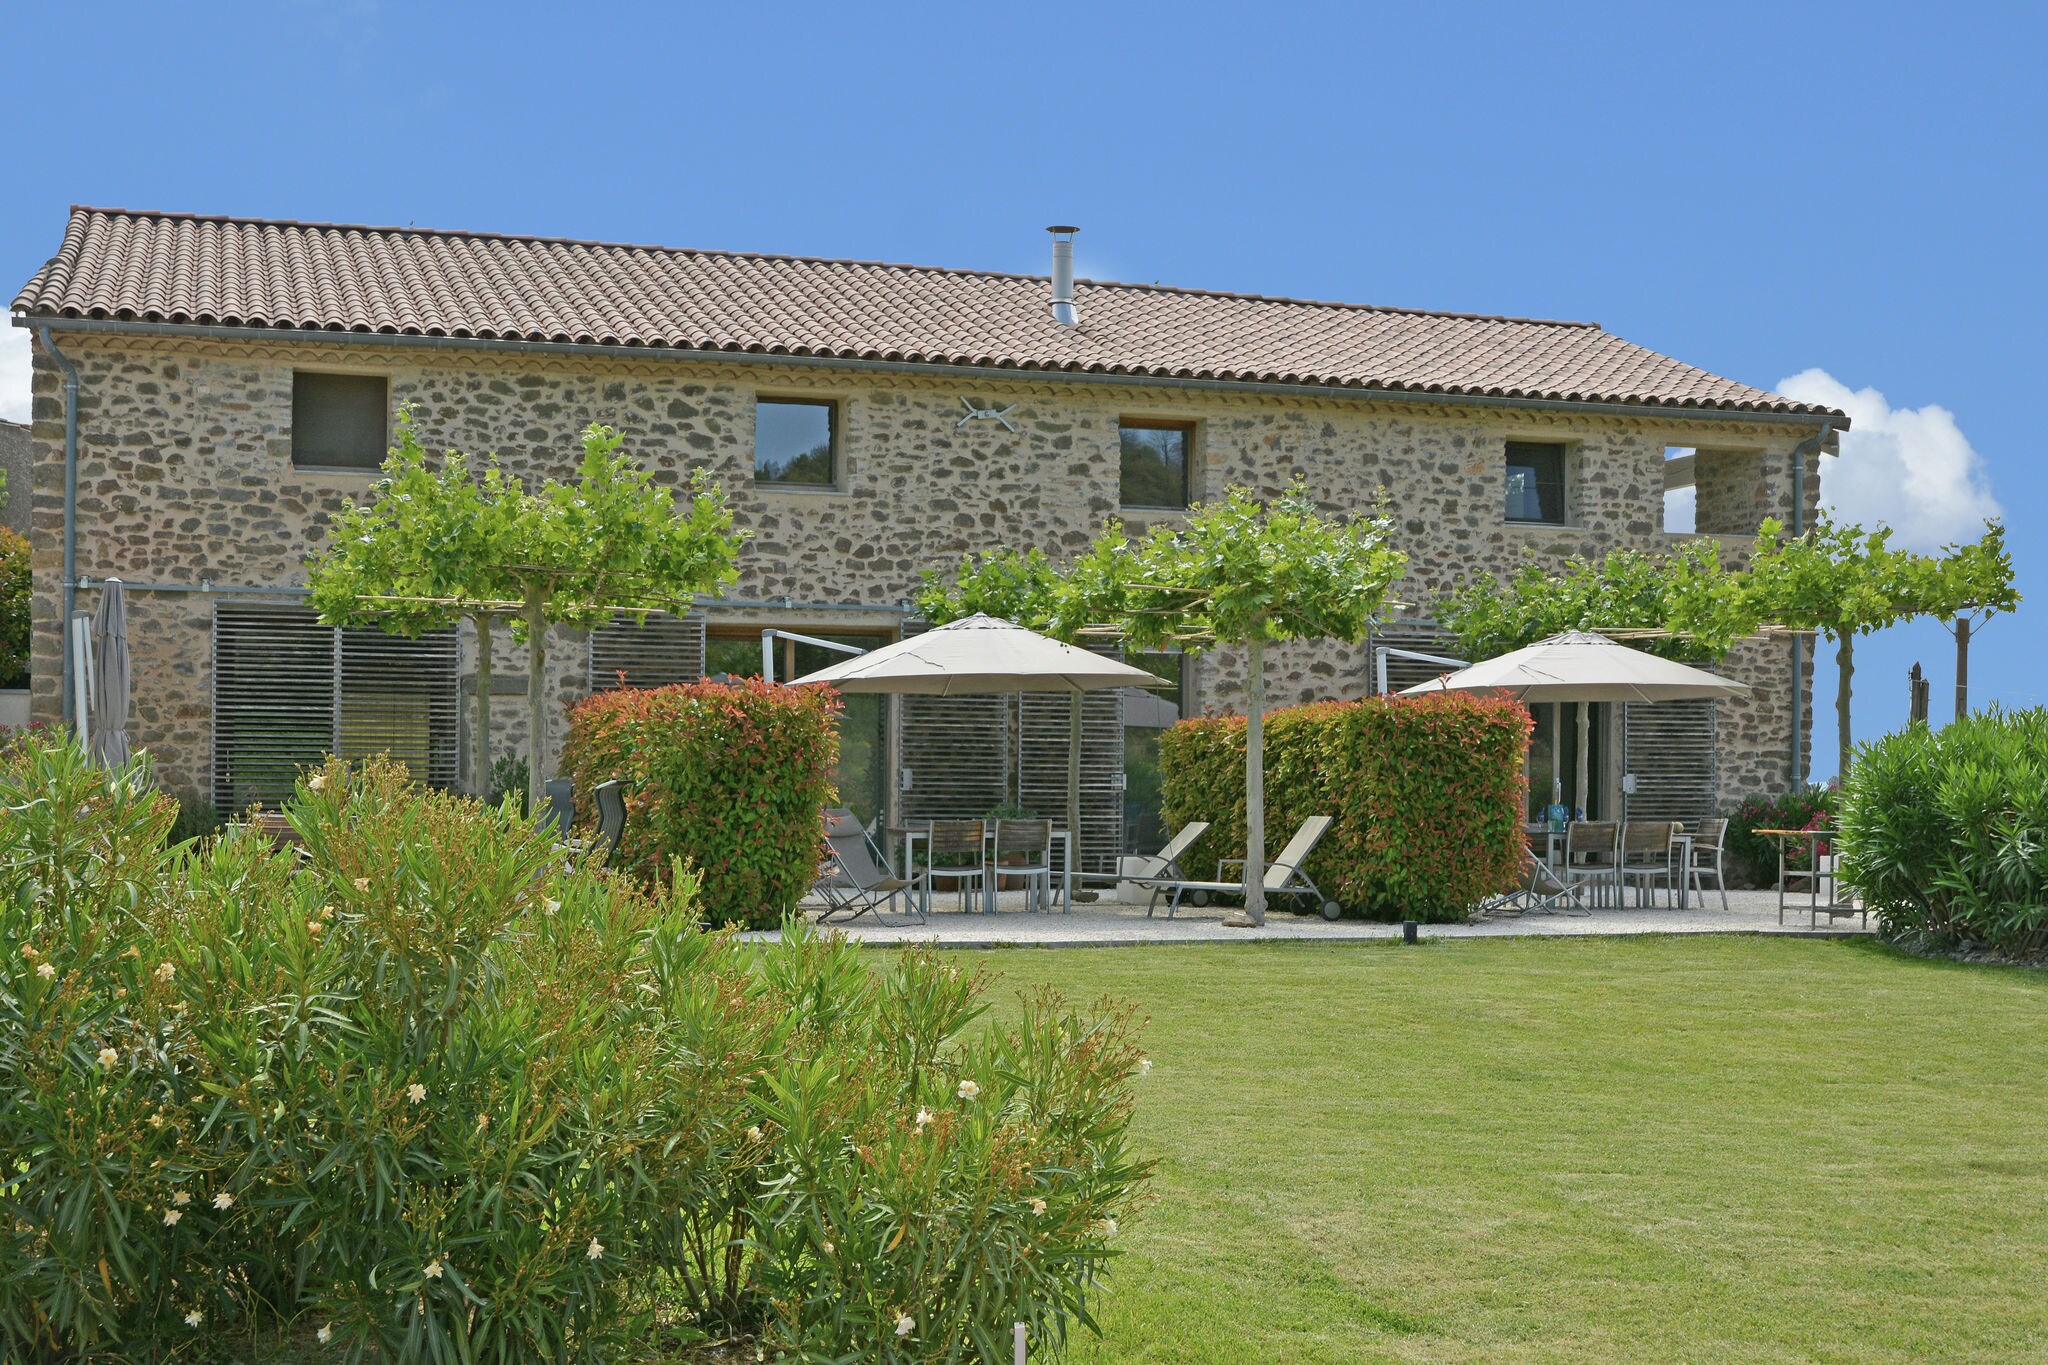 18th century farmhouse on a domain of 1.2 ha with vineyard, private swimming pool, and pool house